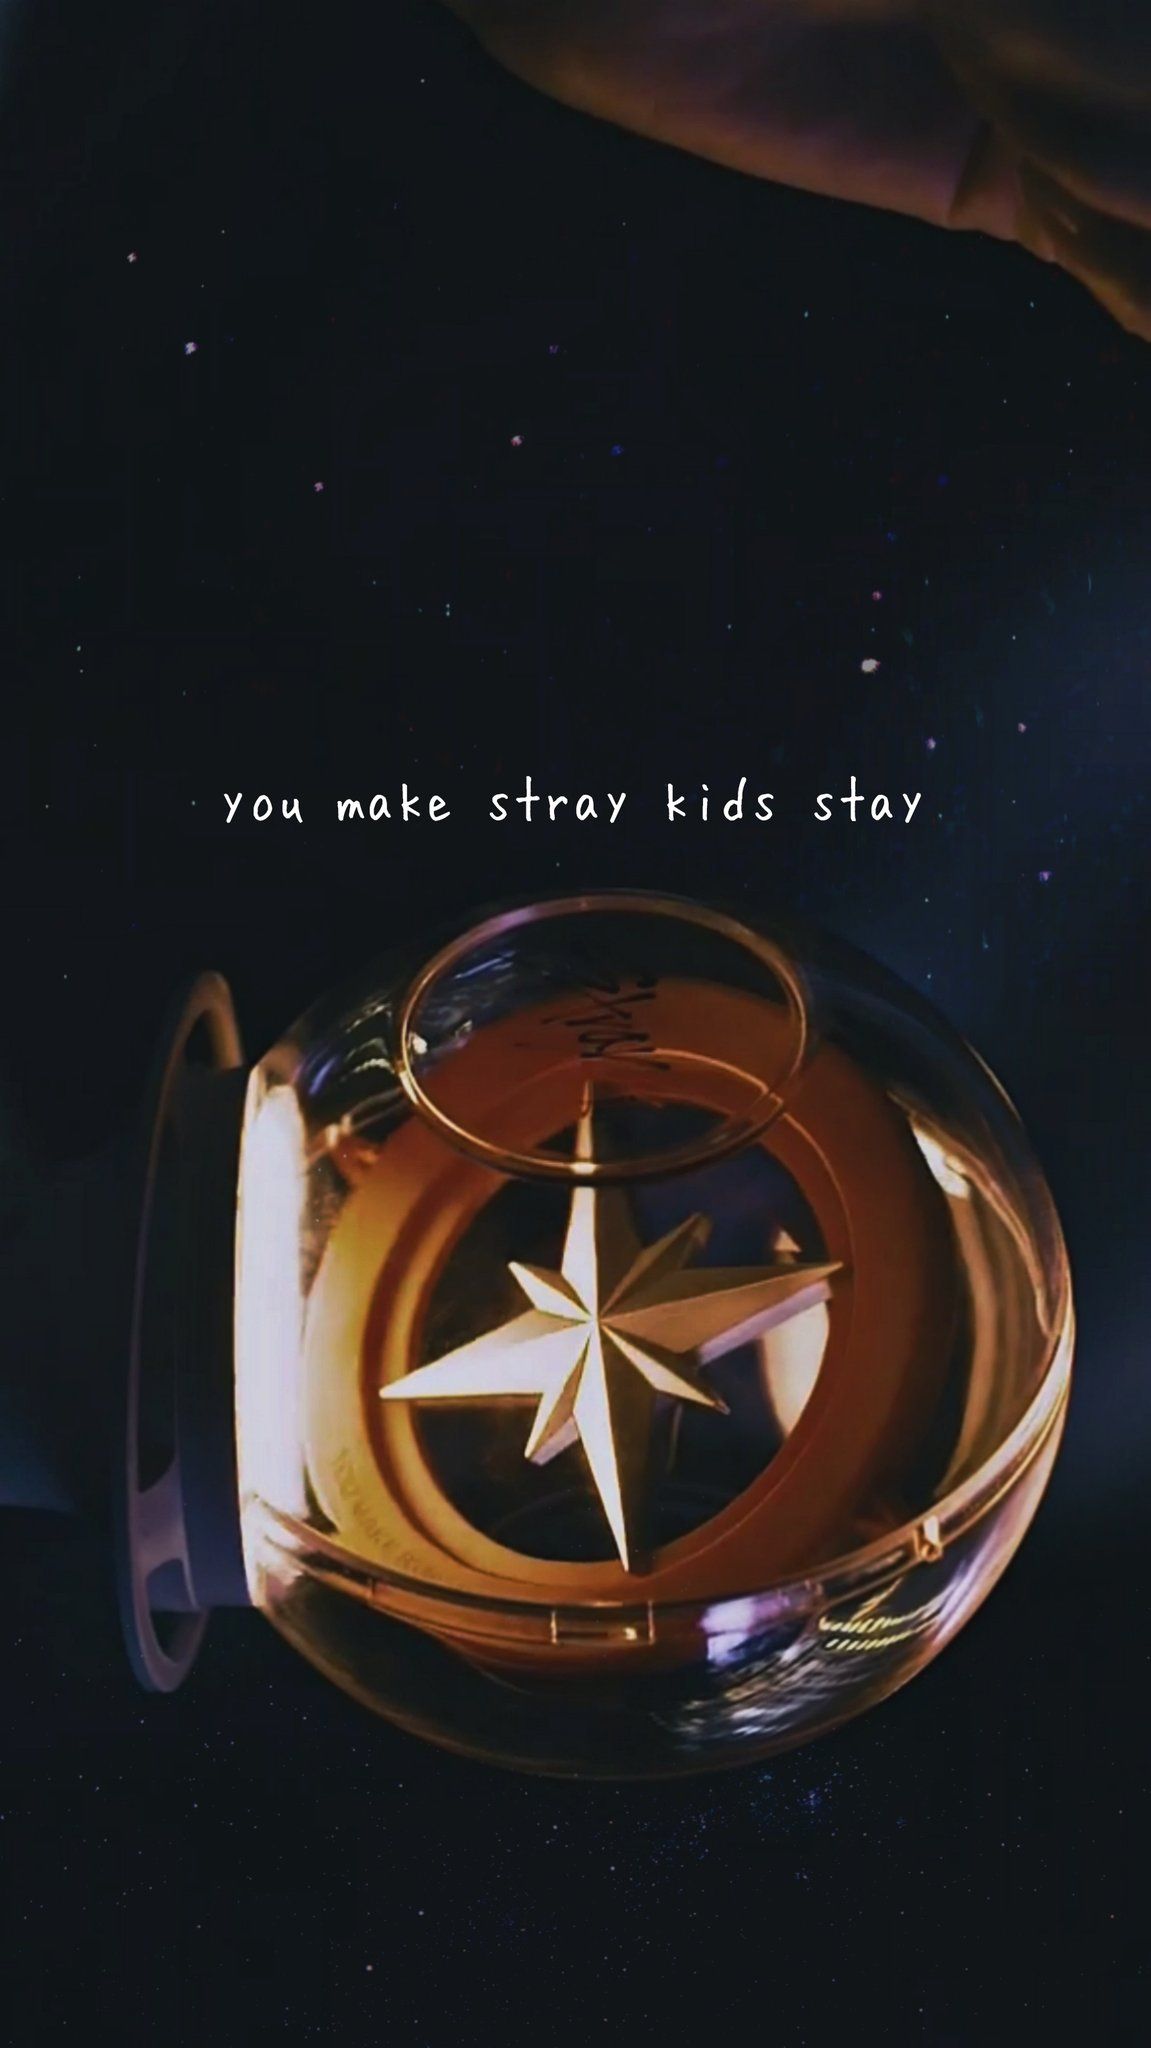 STRAY KIDS WALLPAPER - [ #straykids #스트레이키즈 ] SUCH A BEAUTIFUL SONG *ugly crying* #YouCanSTAY #STAYSwillSTAY #Clé_LEVANTER #바람 #Levanter #YouMakeStrayKidsStay #StrayKidsComeback